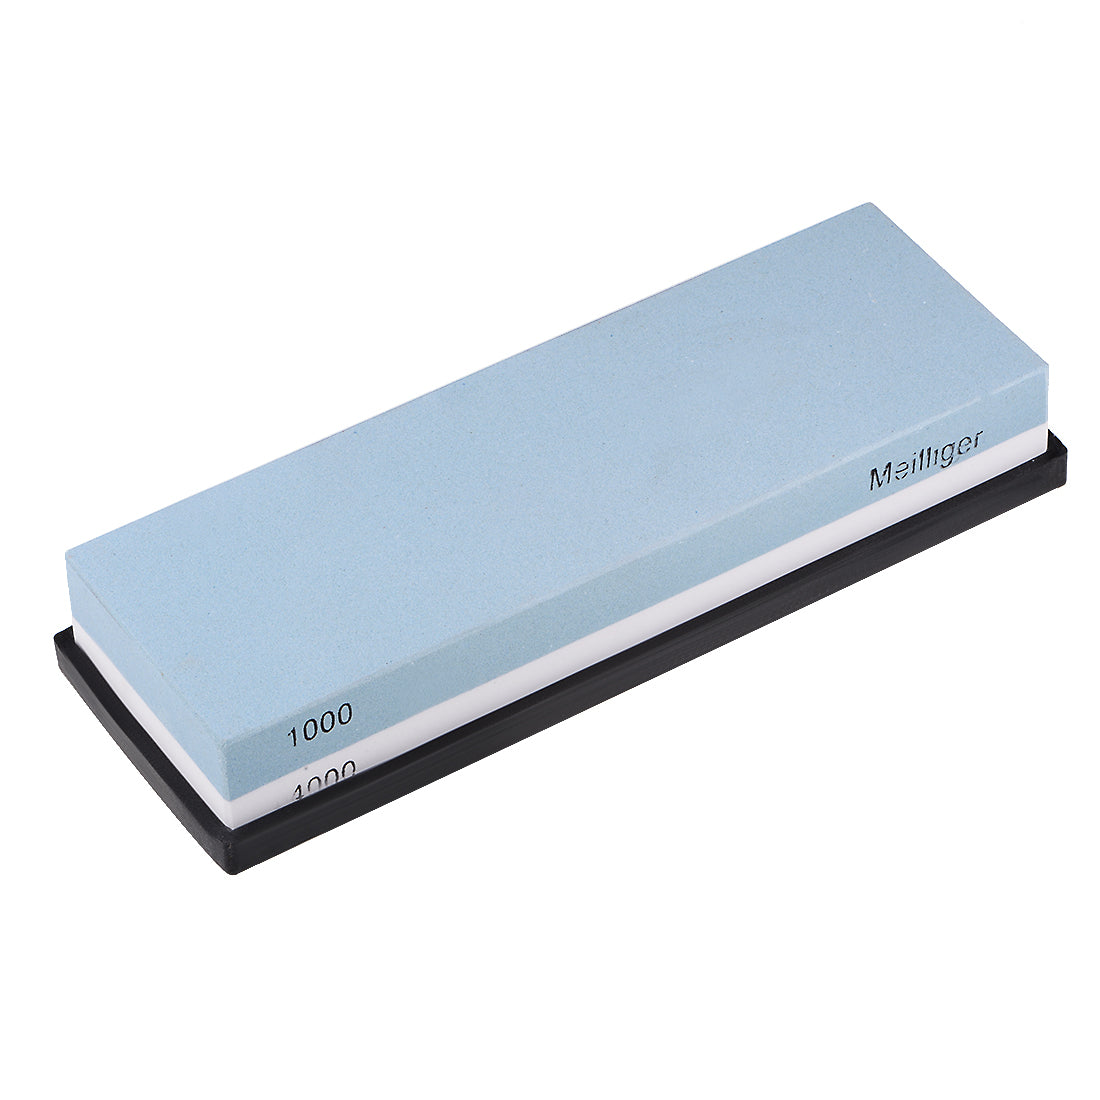 uxcell Uxcell Double-Sided Whetstone Knives Sharpener Sharpening Stone 1000/4000 Grit for Scissors Razors Carving Tool